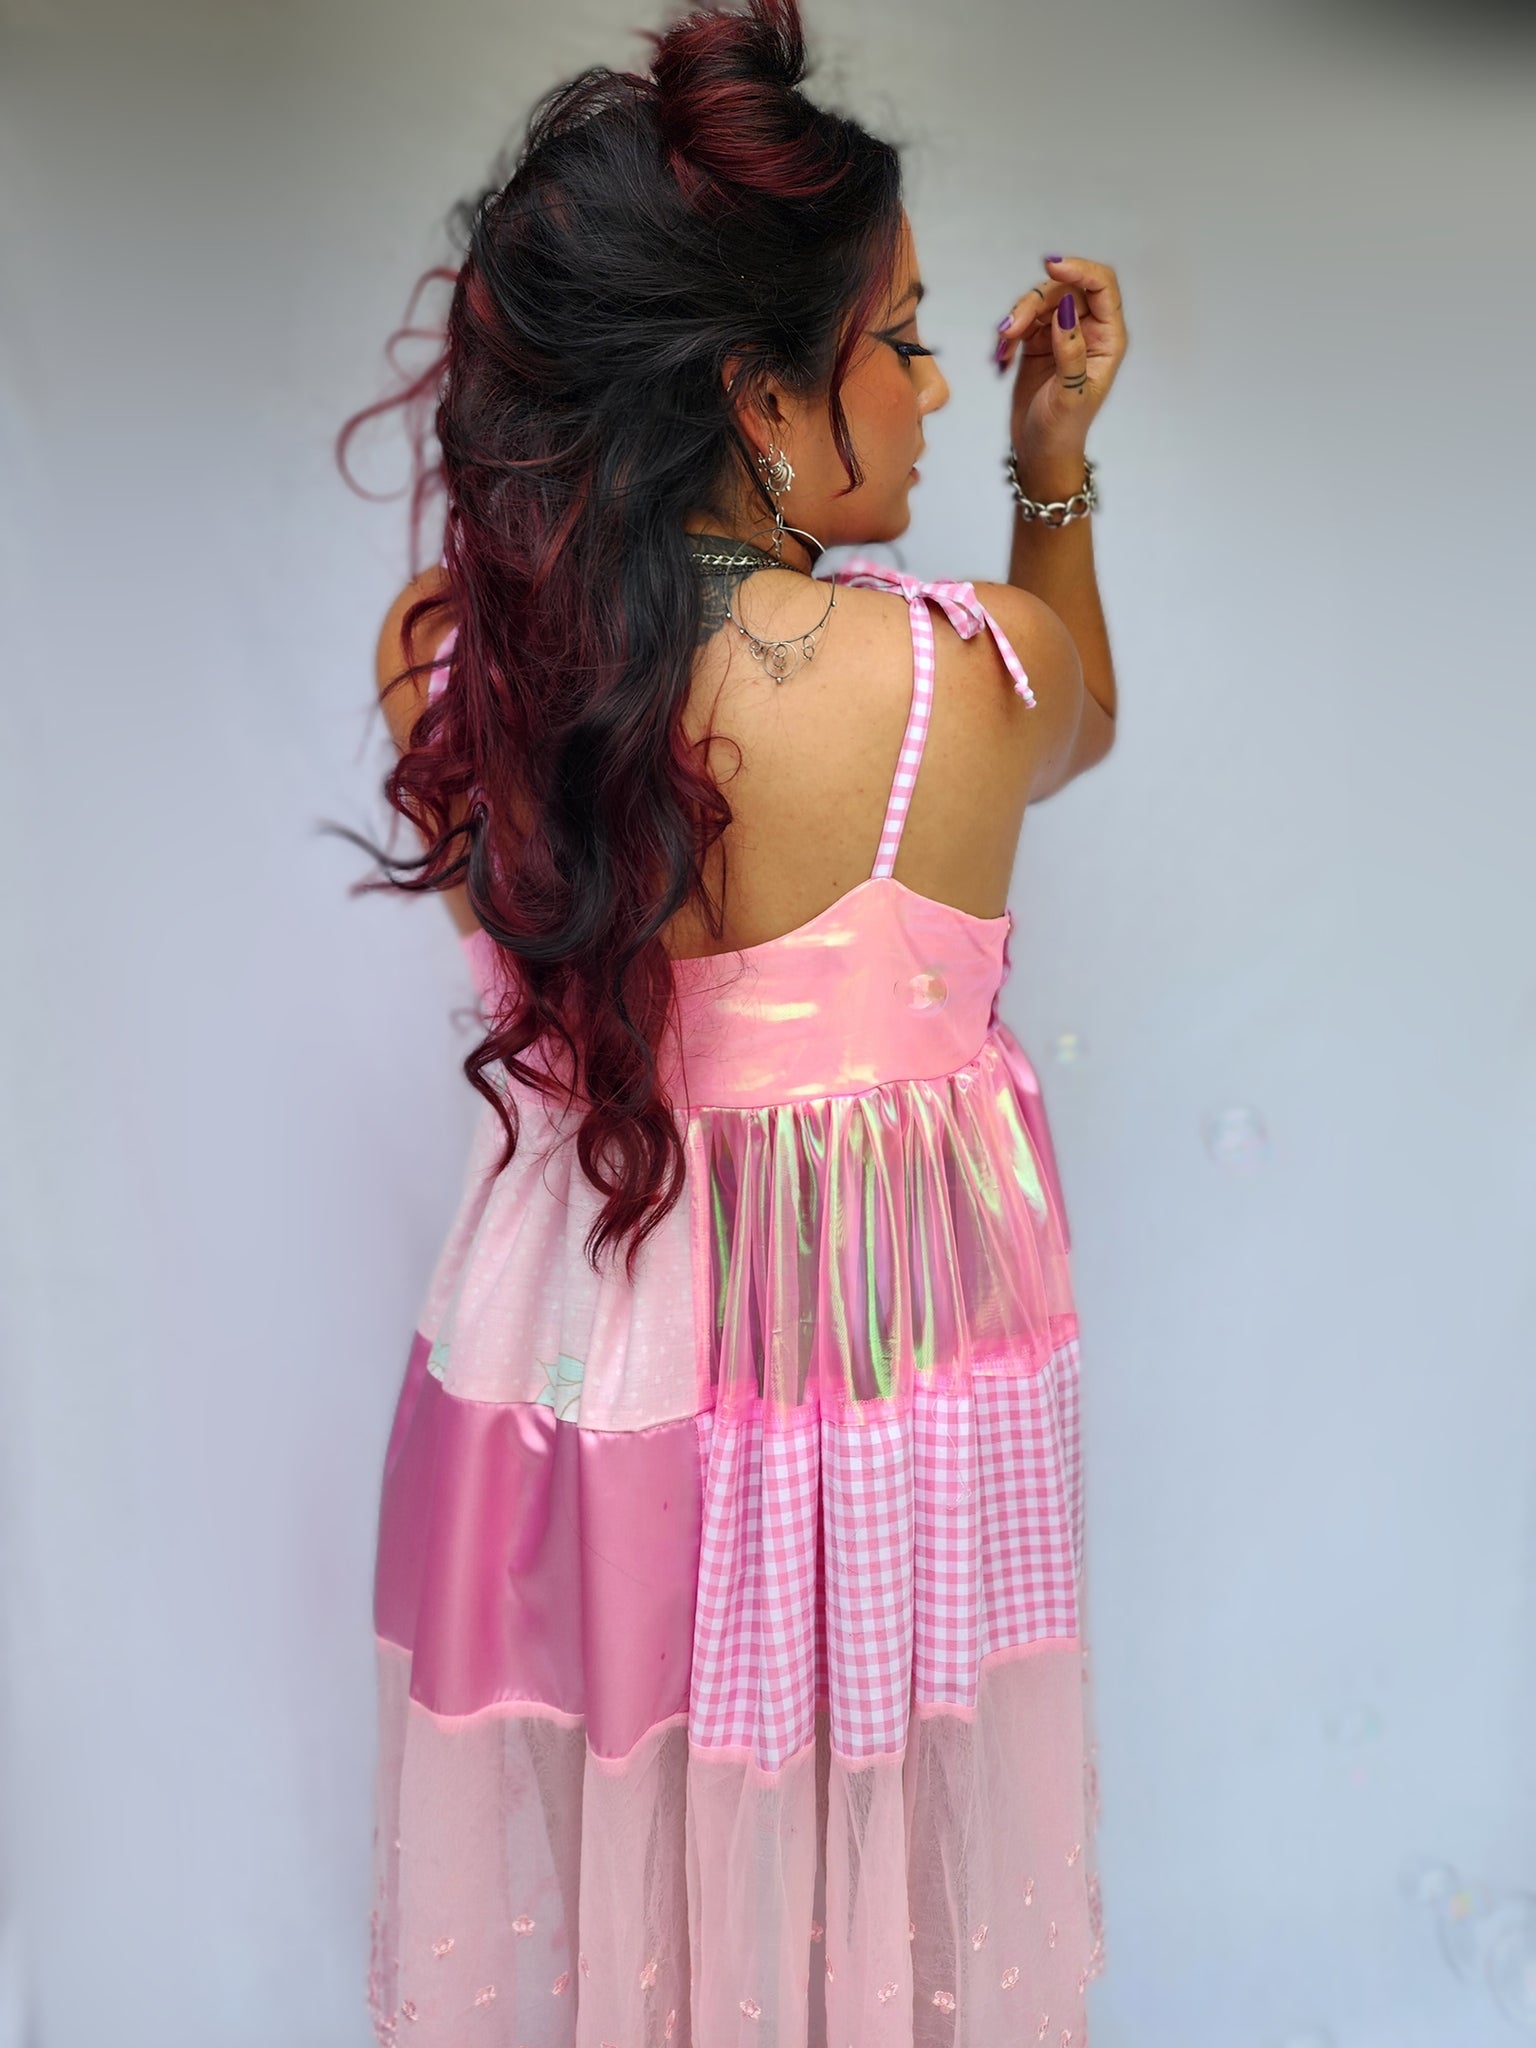 Pretty in Pink Patchwork Dress